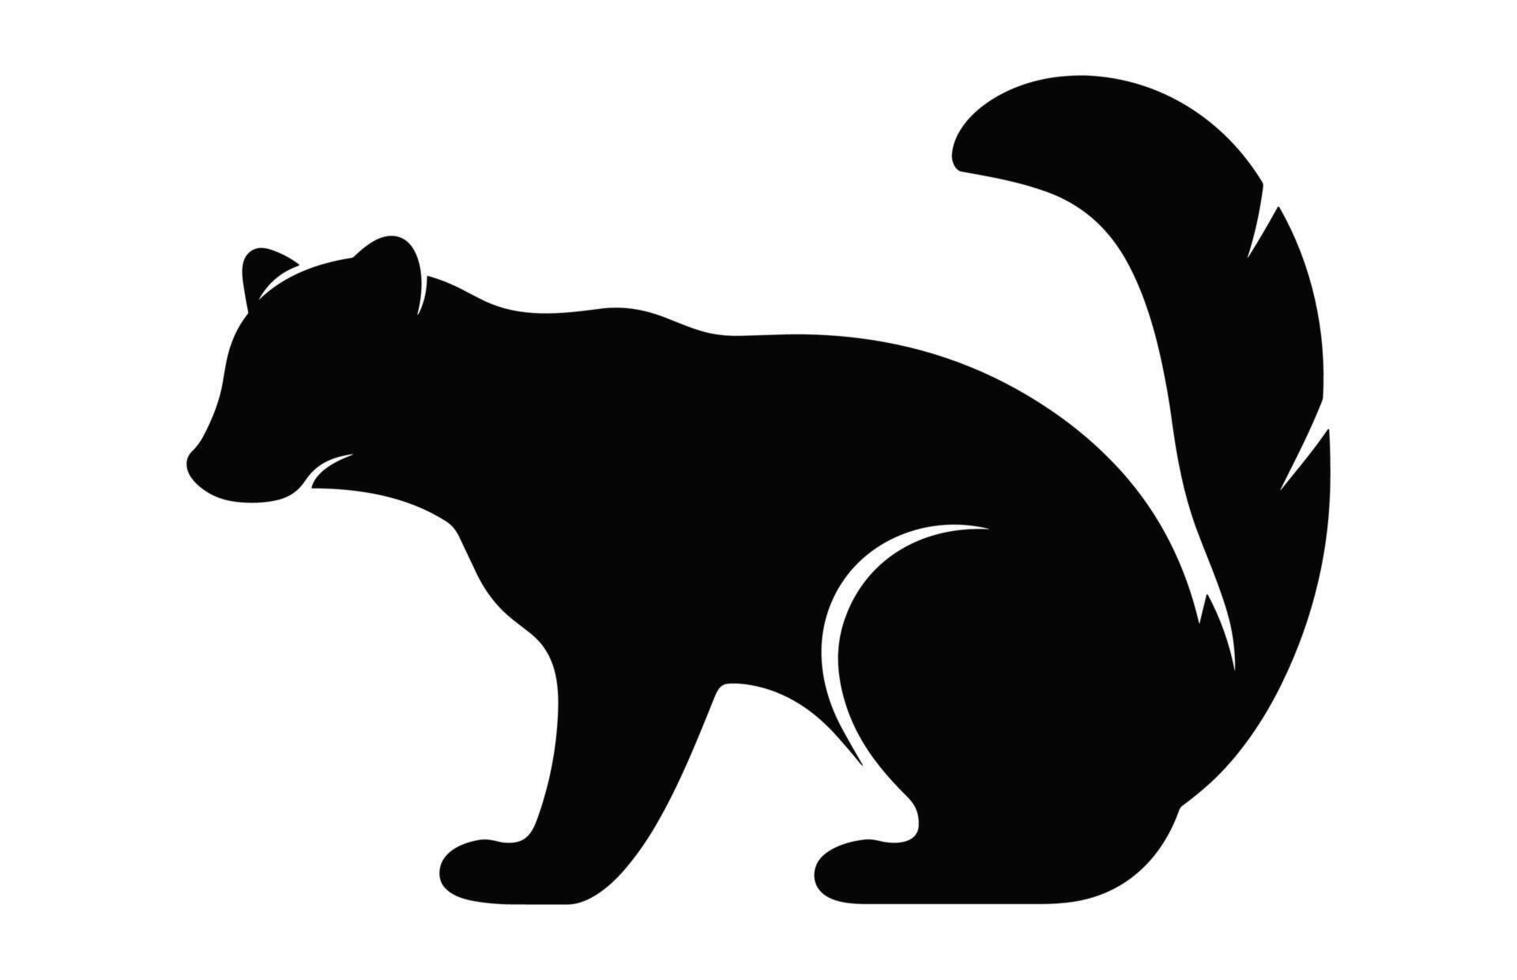 Coati Animal Silhouette black Vector isolated on a white background